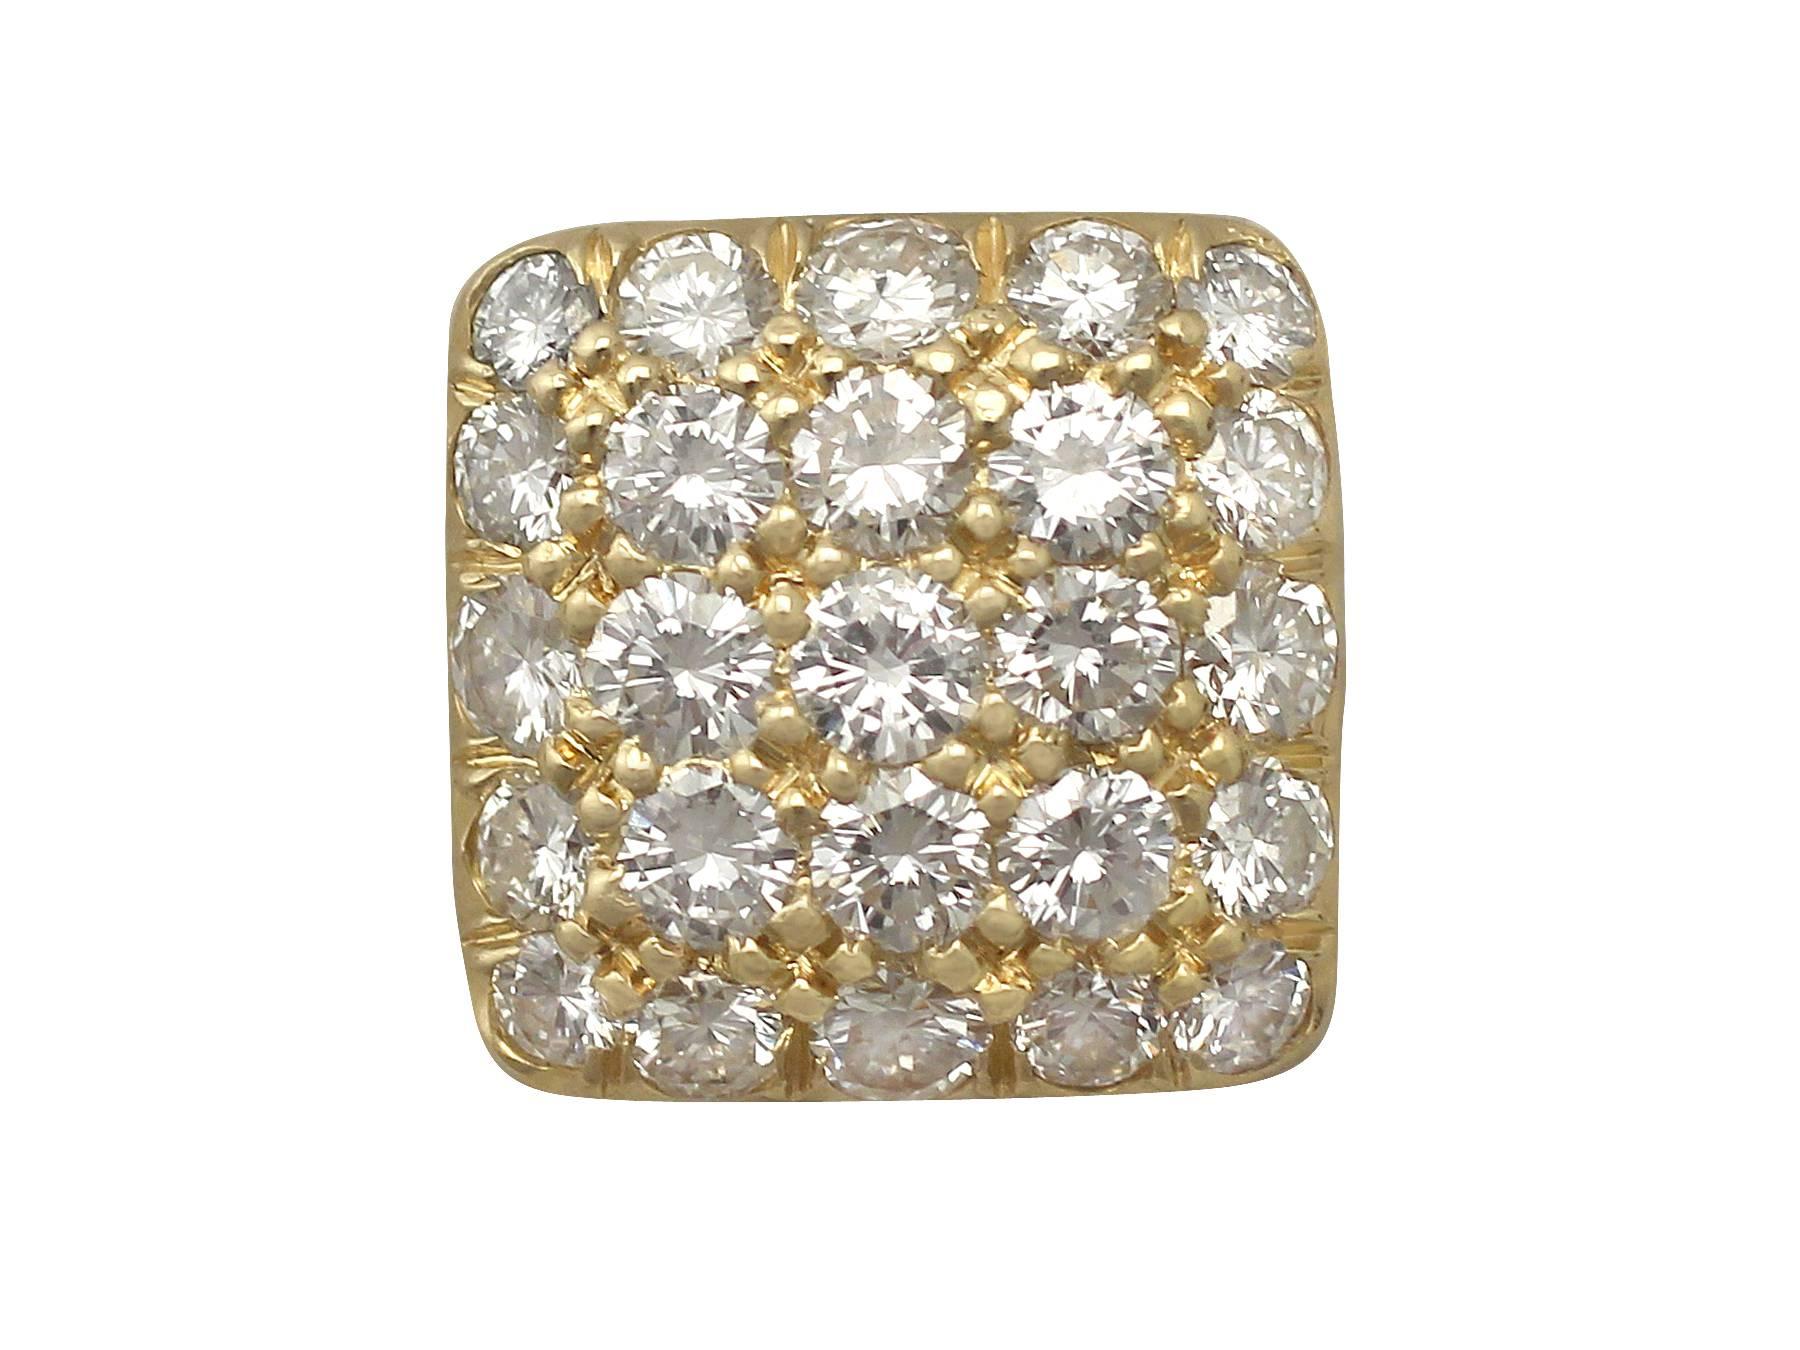 A fine and impressive pair of 1.50 carat diamond and 18 karat yellow gold cufflinks; part of our diverse antique jewelry and estate jewelry collections 

This fine and impressive pair of diamond cufflinks has been crafted in 18k yellow